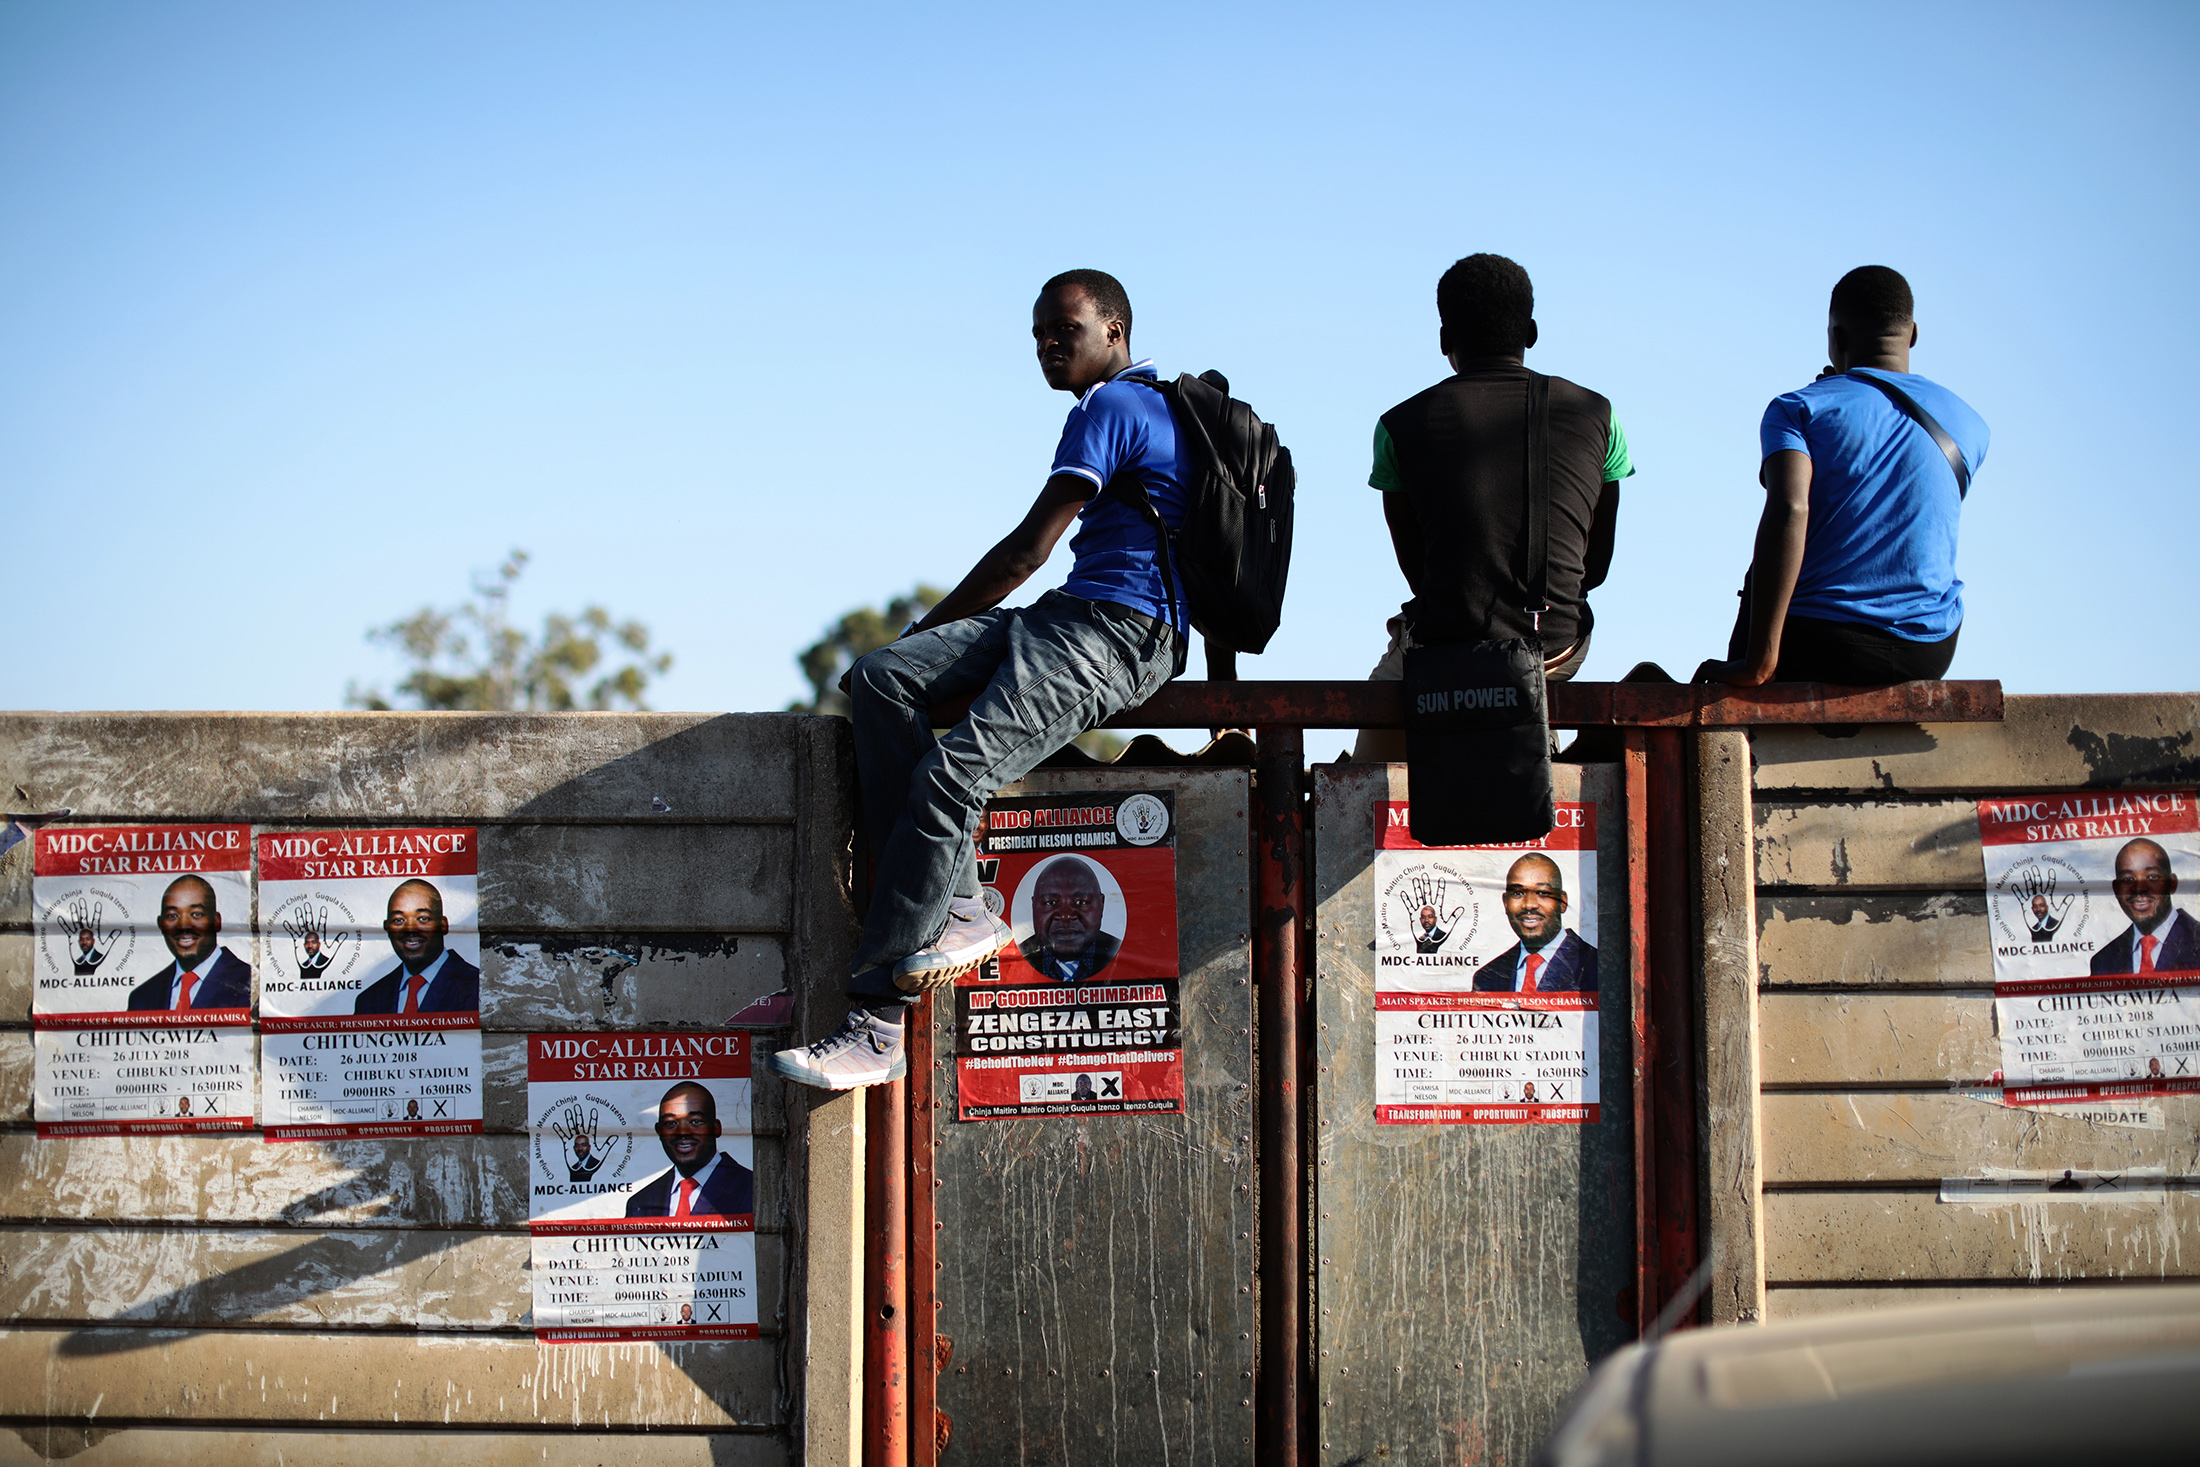 Election&nbsp;posters hang on a wall as people watch MDC-Alliance (Movement for Democratic Change) leader and opposition presidential candidate Nelson Chamisa speaking during a rally on July 26, 2018 in Chitungwiza, Zimbabweans.